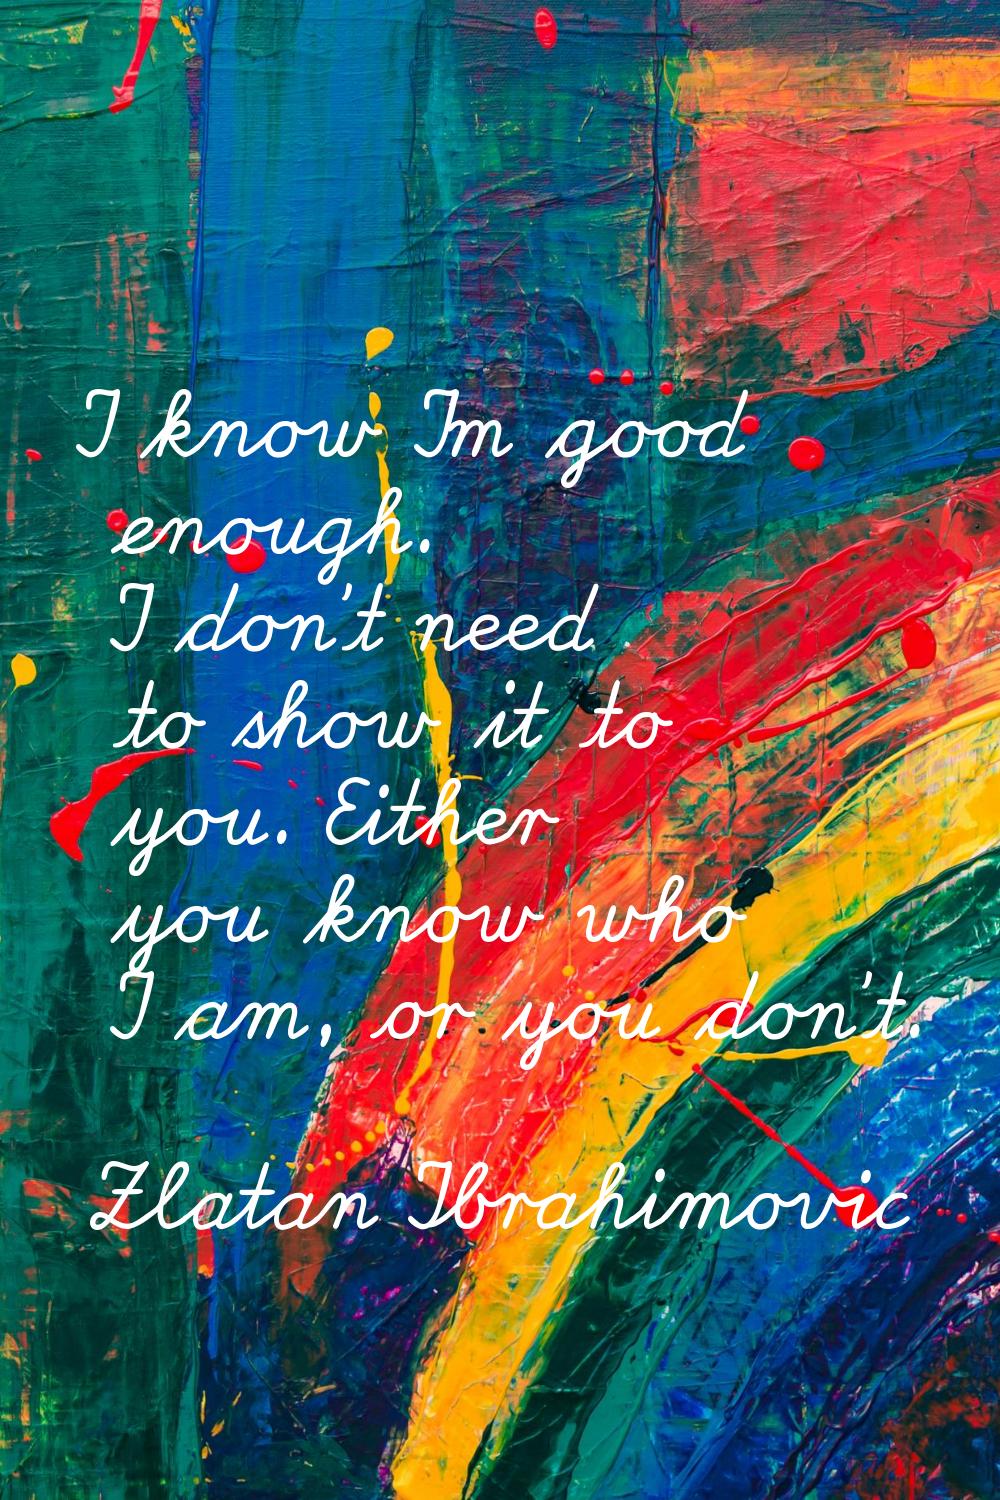 I know I'm good enough. I don't need to show it to you. Either you know who I am, or you don't.